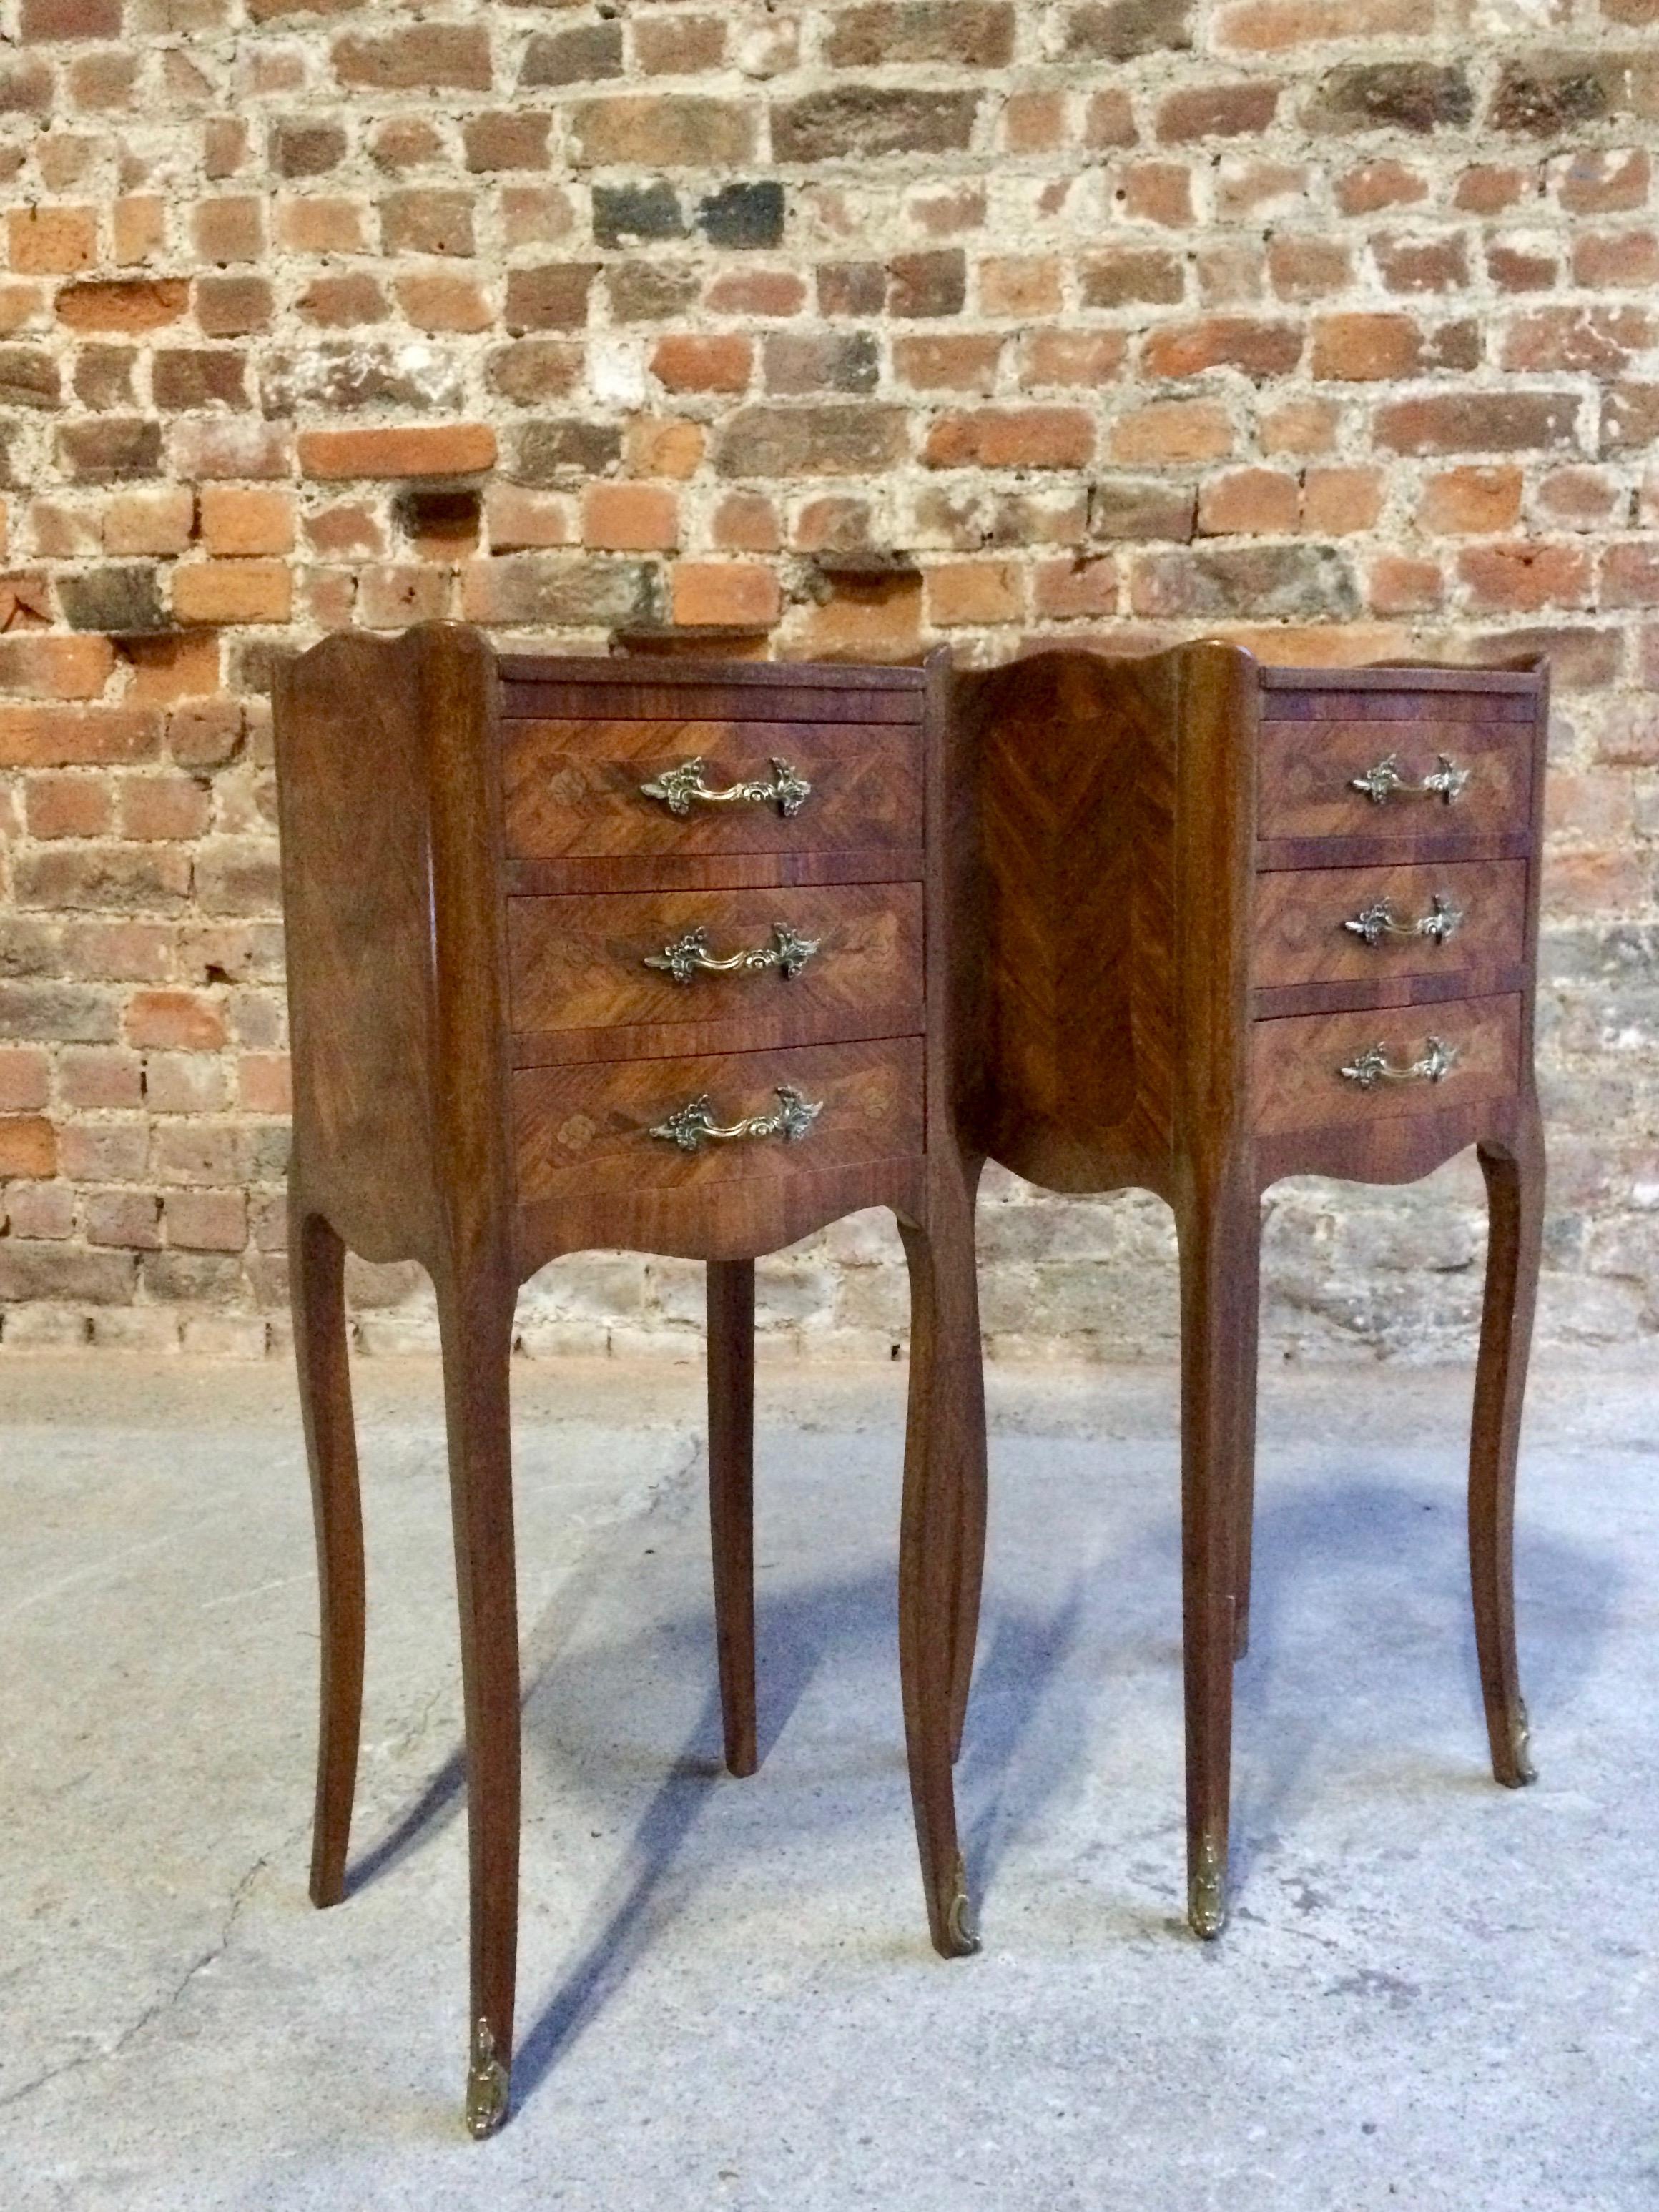 Fabulous Antique French pair of Louis XV style Bombe Commode bedside cabinets circa 1890, the inlaid marquetry tops over three drawers with inlaid flowers and decorations with bronze handles and gilt mounts, bronze accents to the sides and legs, all